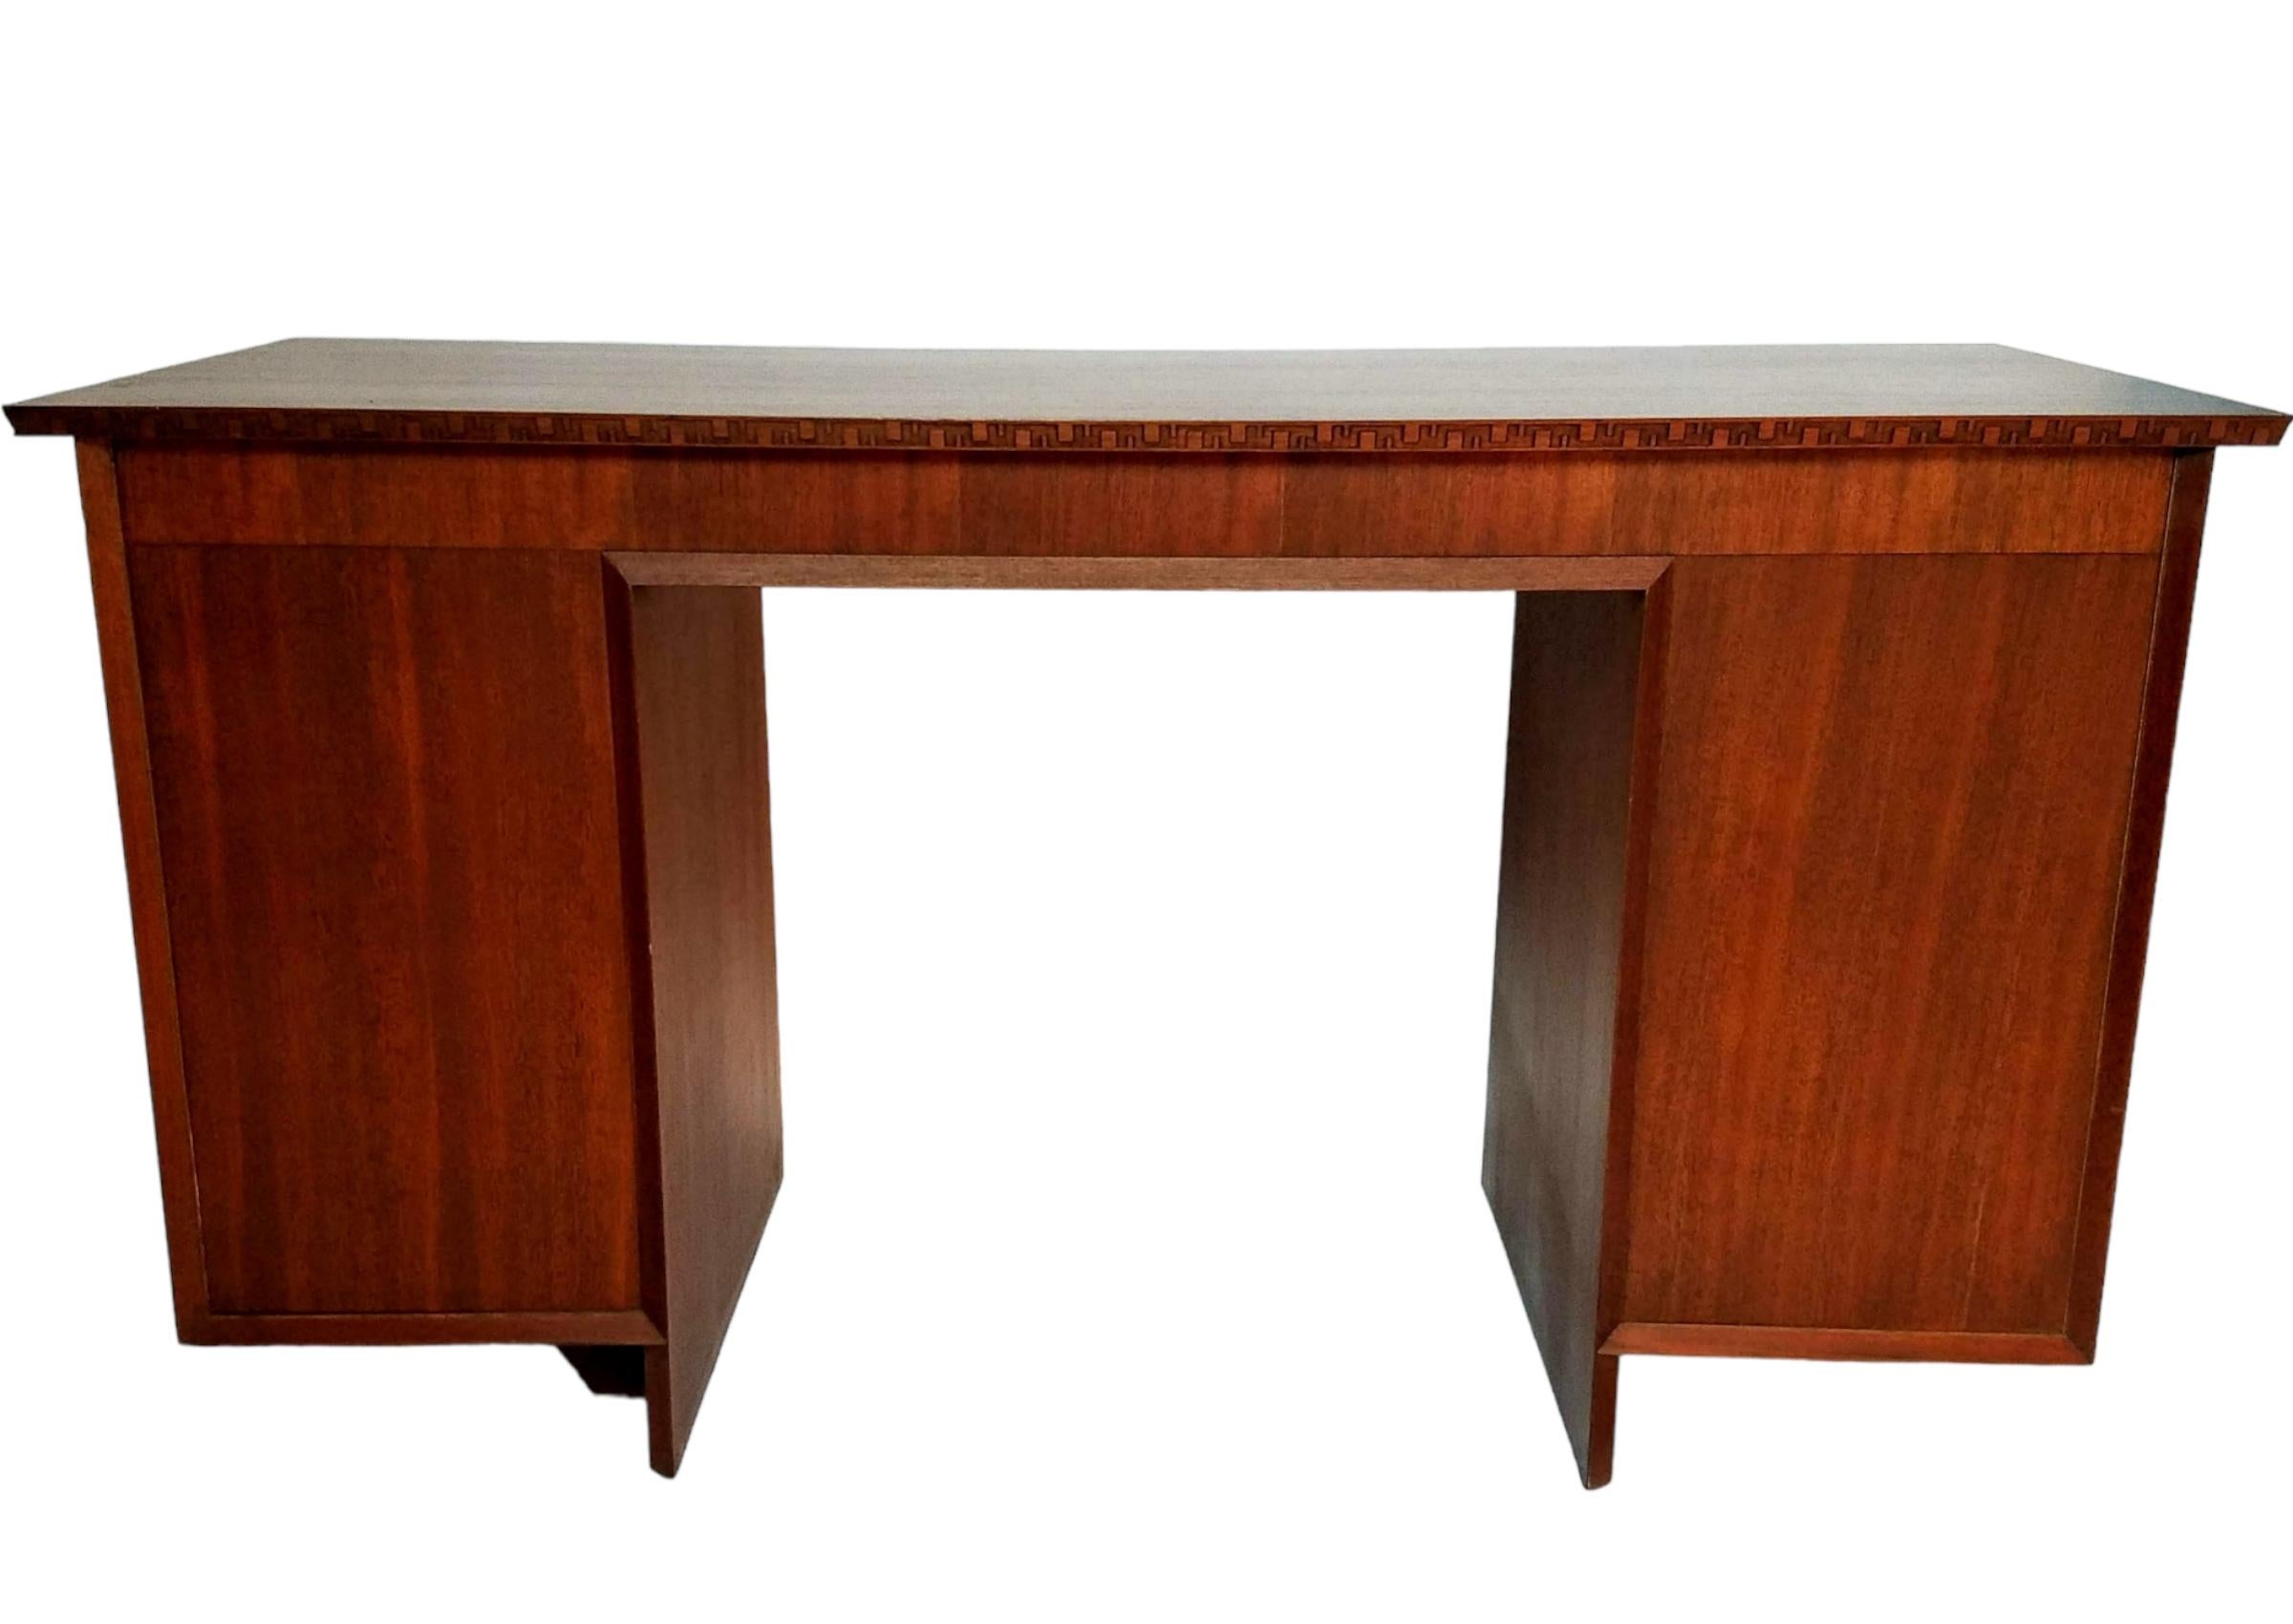 A classic nine drawer mahogany desk designed by Frank Lloyd Wright for his Taliesin line for Heritage Henredon furniture.
Beautifully detailed with a continuous incised carved greek key trim bordering the under edge of the top and the edges of the